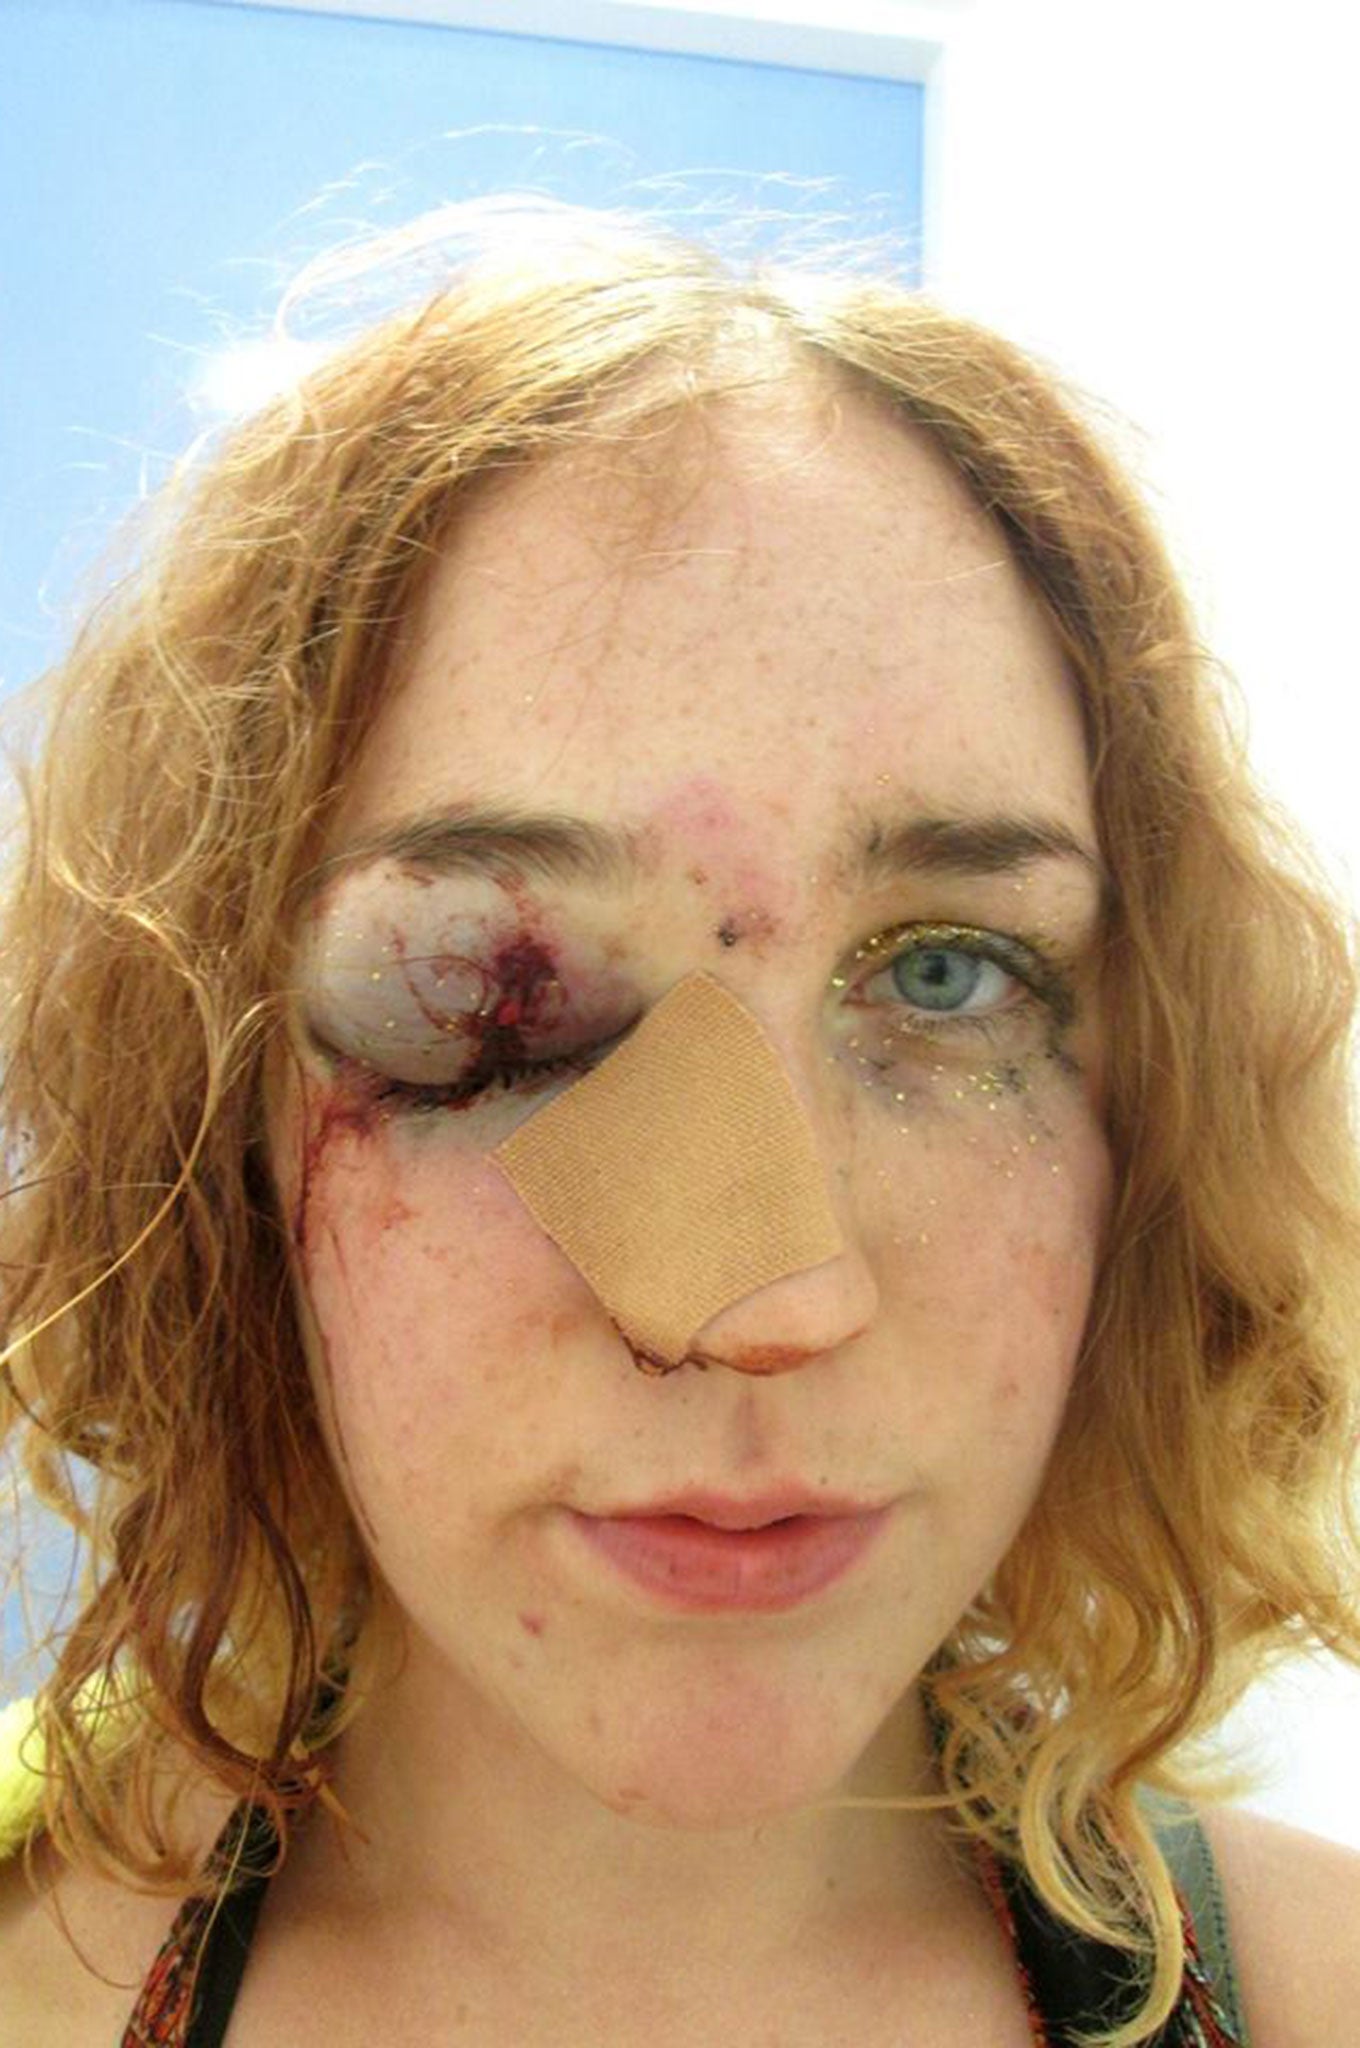 Notting Hill Carnival Woman Shares Selfie After Being ‘punched In Face For Telling Man To Stop